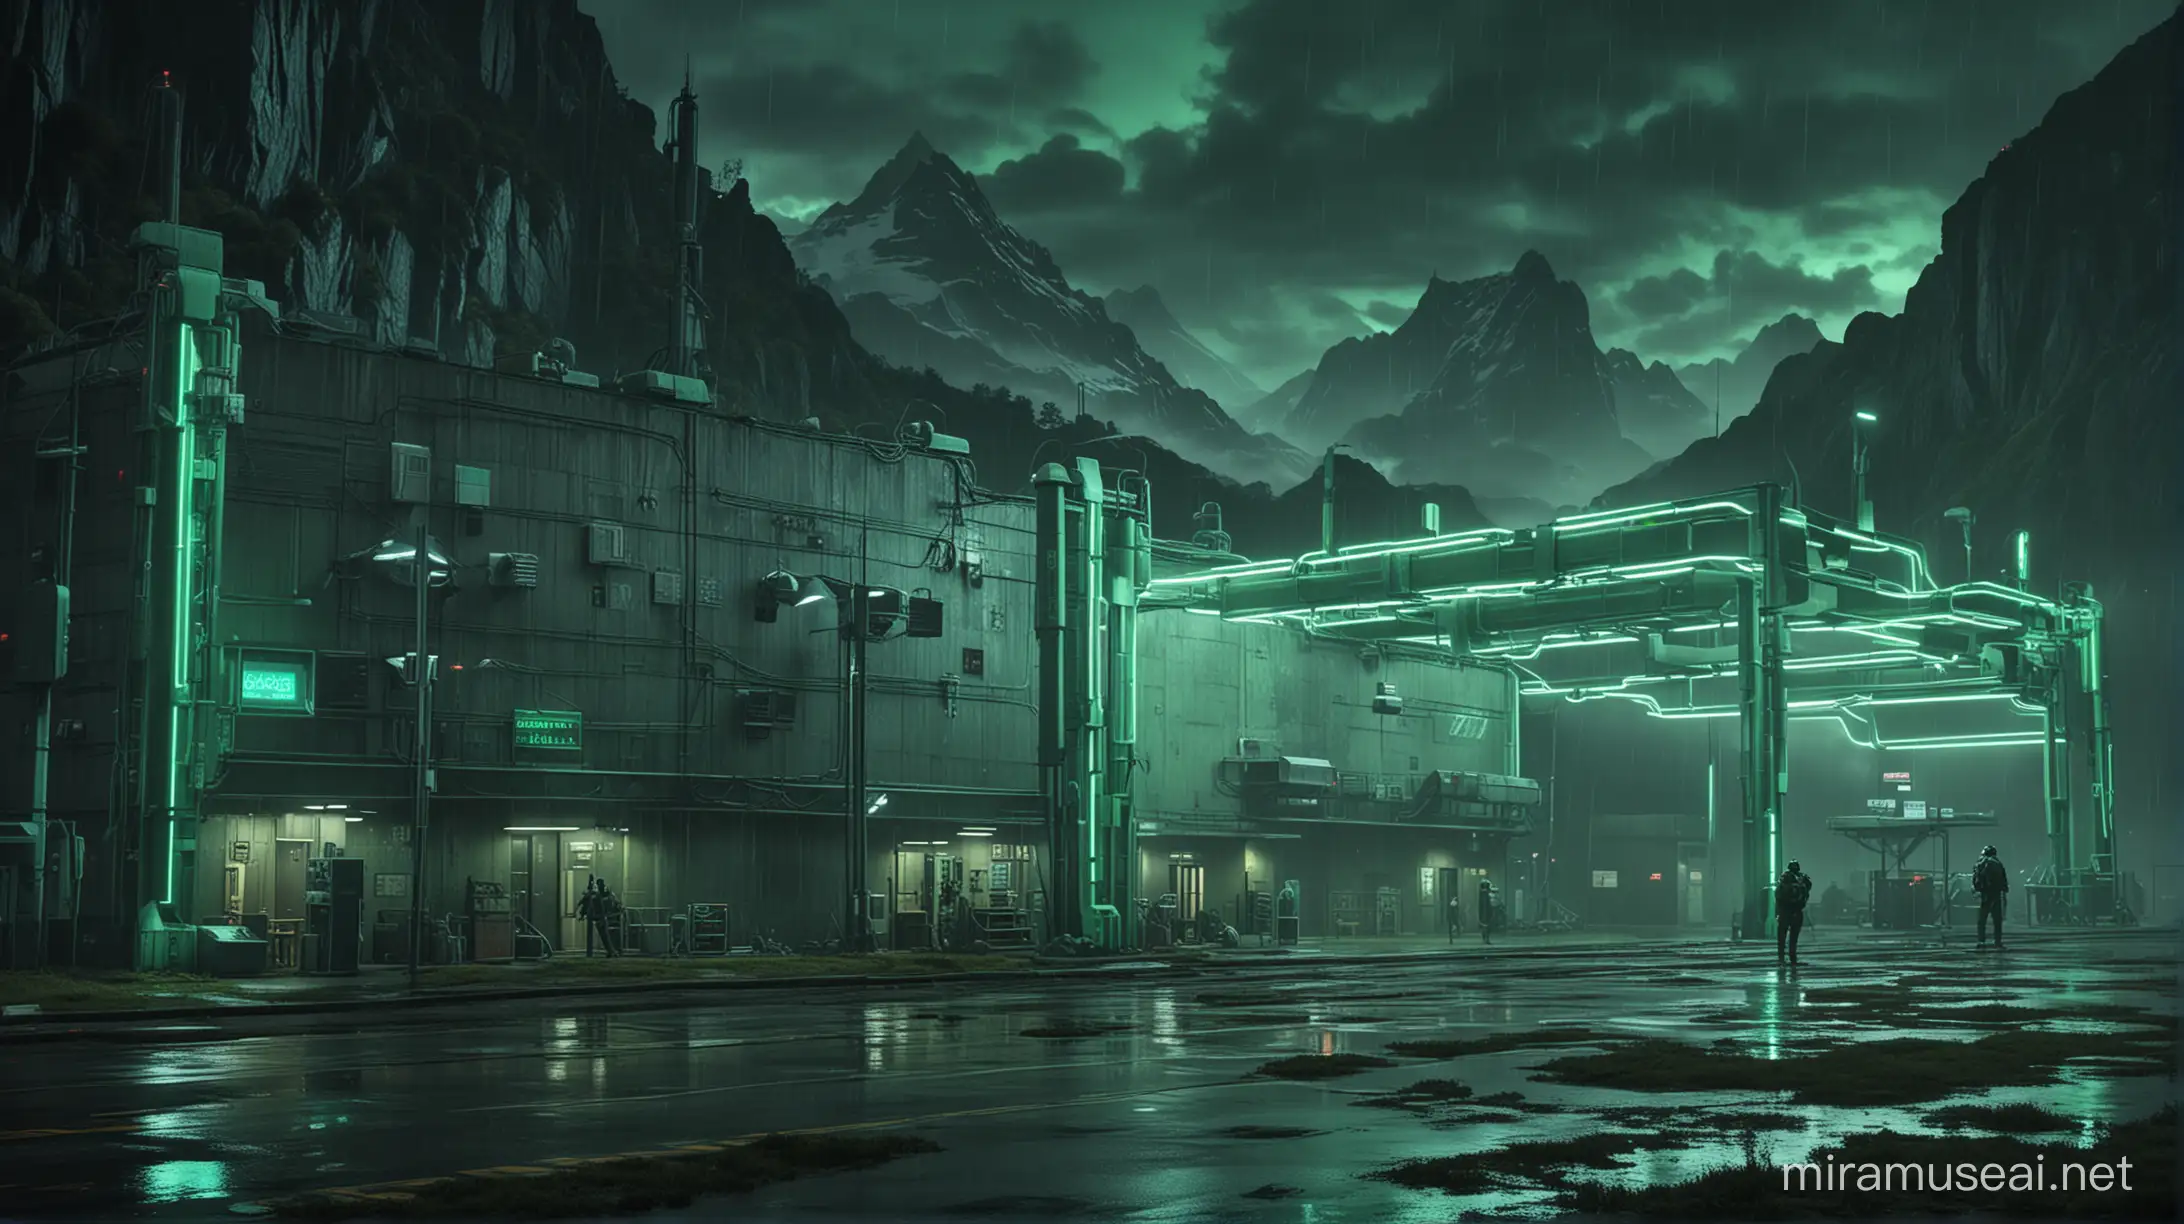 Realistic research centers buildings with one worker around it, green neon and huge neon lights inside the part, its color shadow on the floor, Rainy weather, staff in dark green uniforms and helmets, Atmospheric and cinematic, The huge structures, A dark green smoke rose from the research centers environment and spread in the air, The image space is outside the realistic research center.
with huge satellite antennas,
A huge cubic green neon object,
in the Realistic mountains.
atmospheric and cinematic.
All overall dark green image theme.
Very big lights and lots of green neon lights.
The neon lights in the image should be very bright throughout the image.
The neon lights in the picture should be very bright in the dark
The neon lights in the picture should be very bright.
Very large and bright neon lamps in the structure.
Shades of green throughout the image.
3D.
Several large advanced and strange buildings nearby.